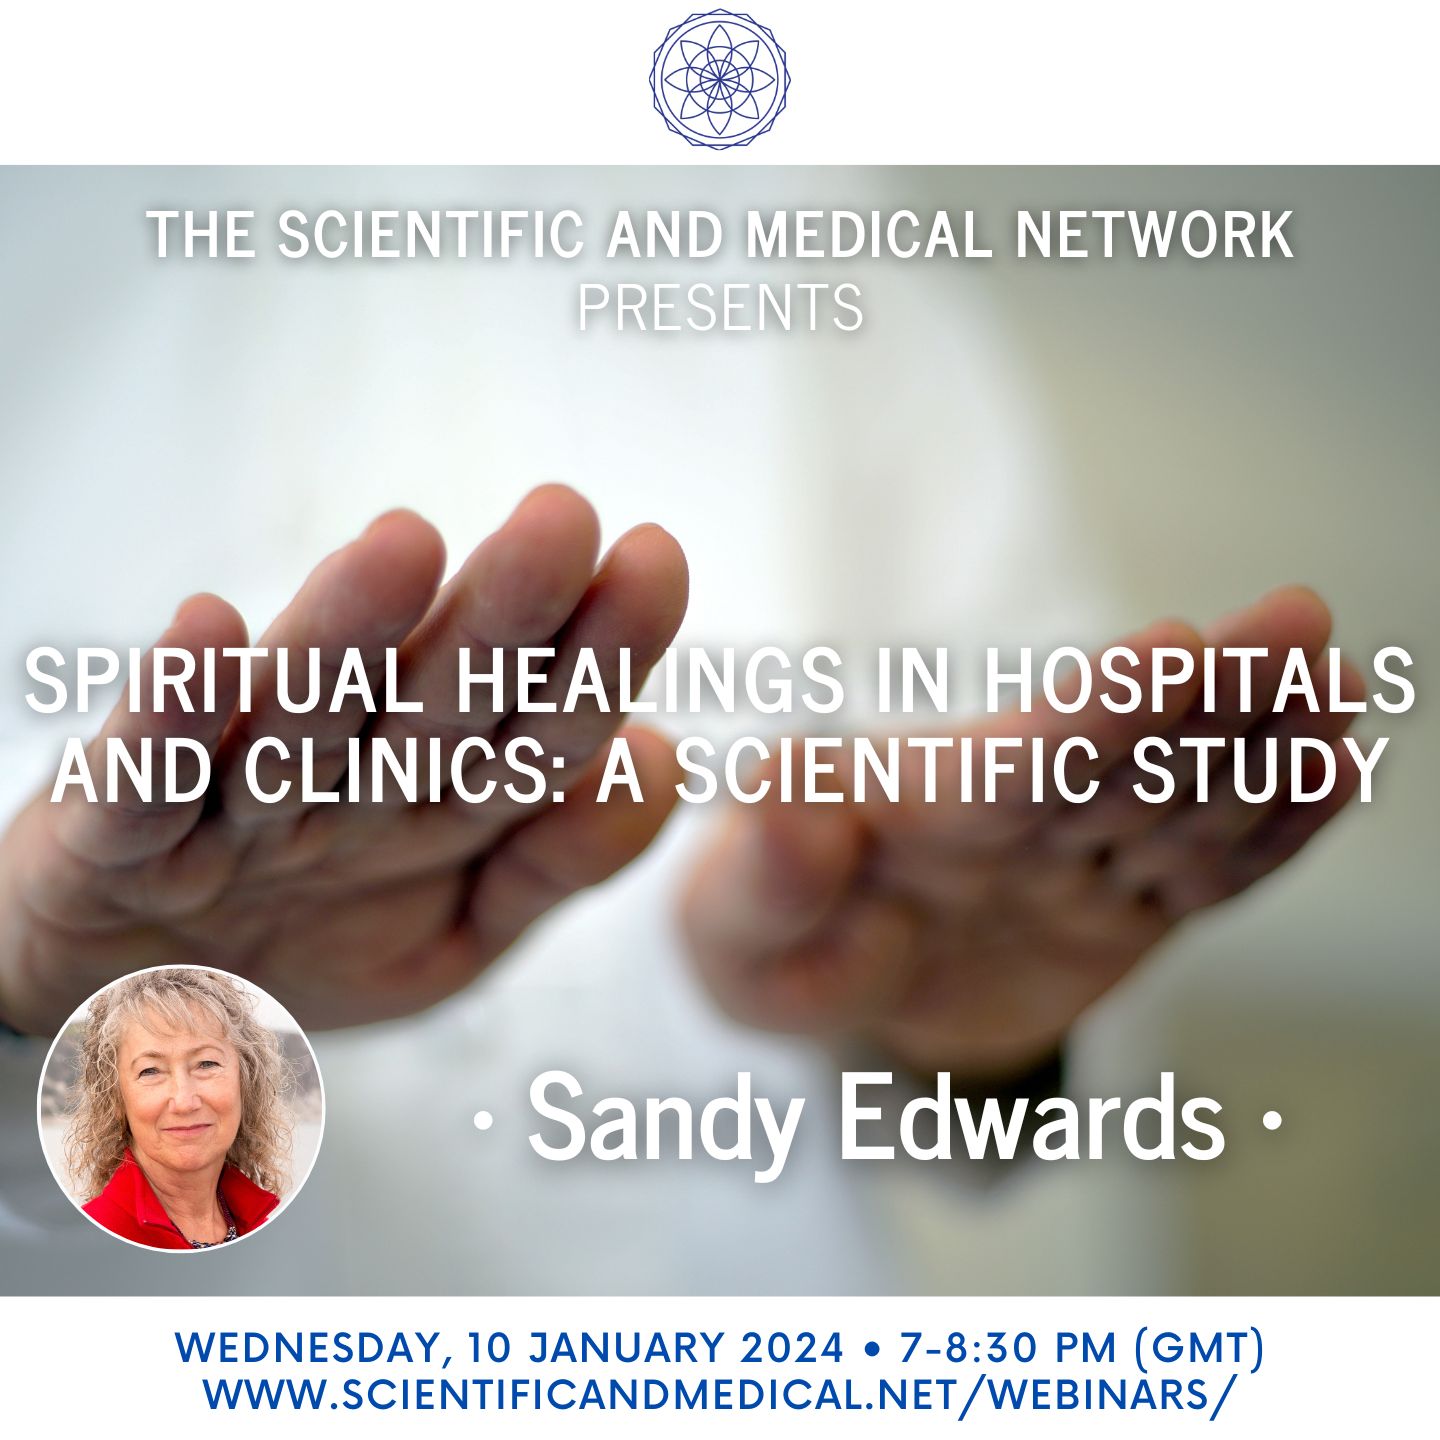 Sandy Edwards – Spiritual Healings in Hospitals and Clinics A Scientific Study